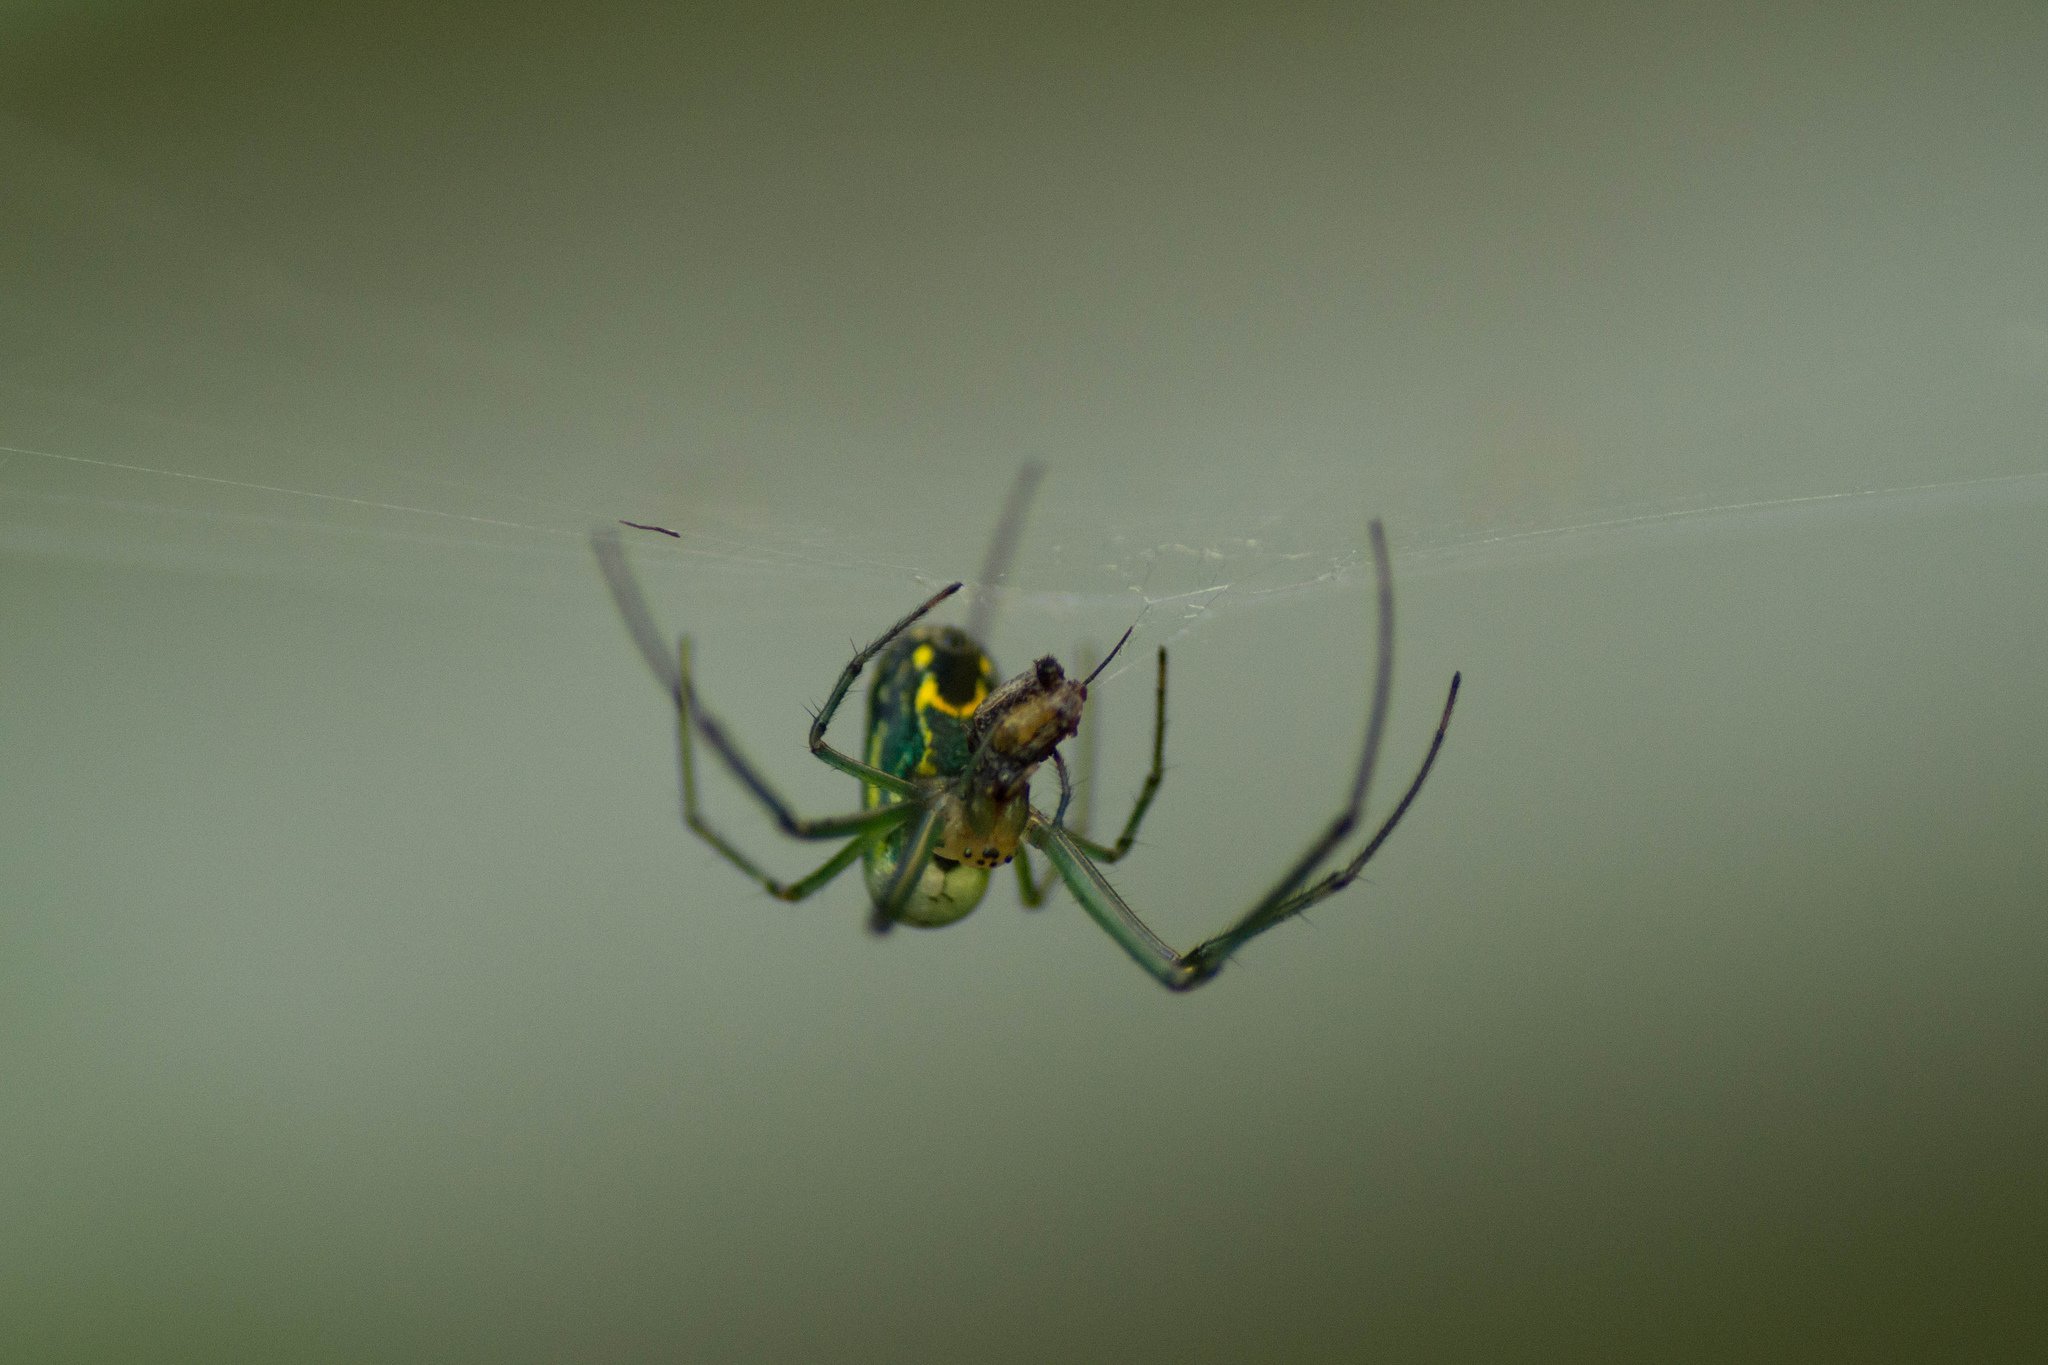 insects, Spiders, Nature, Macro, Closeup, Zoom Wallpaper